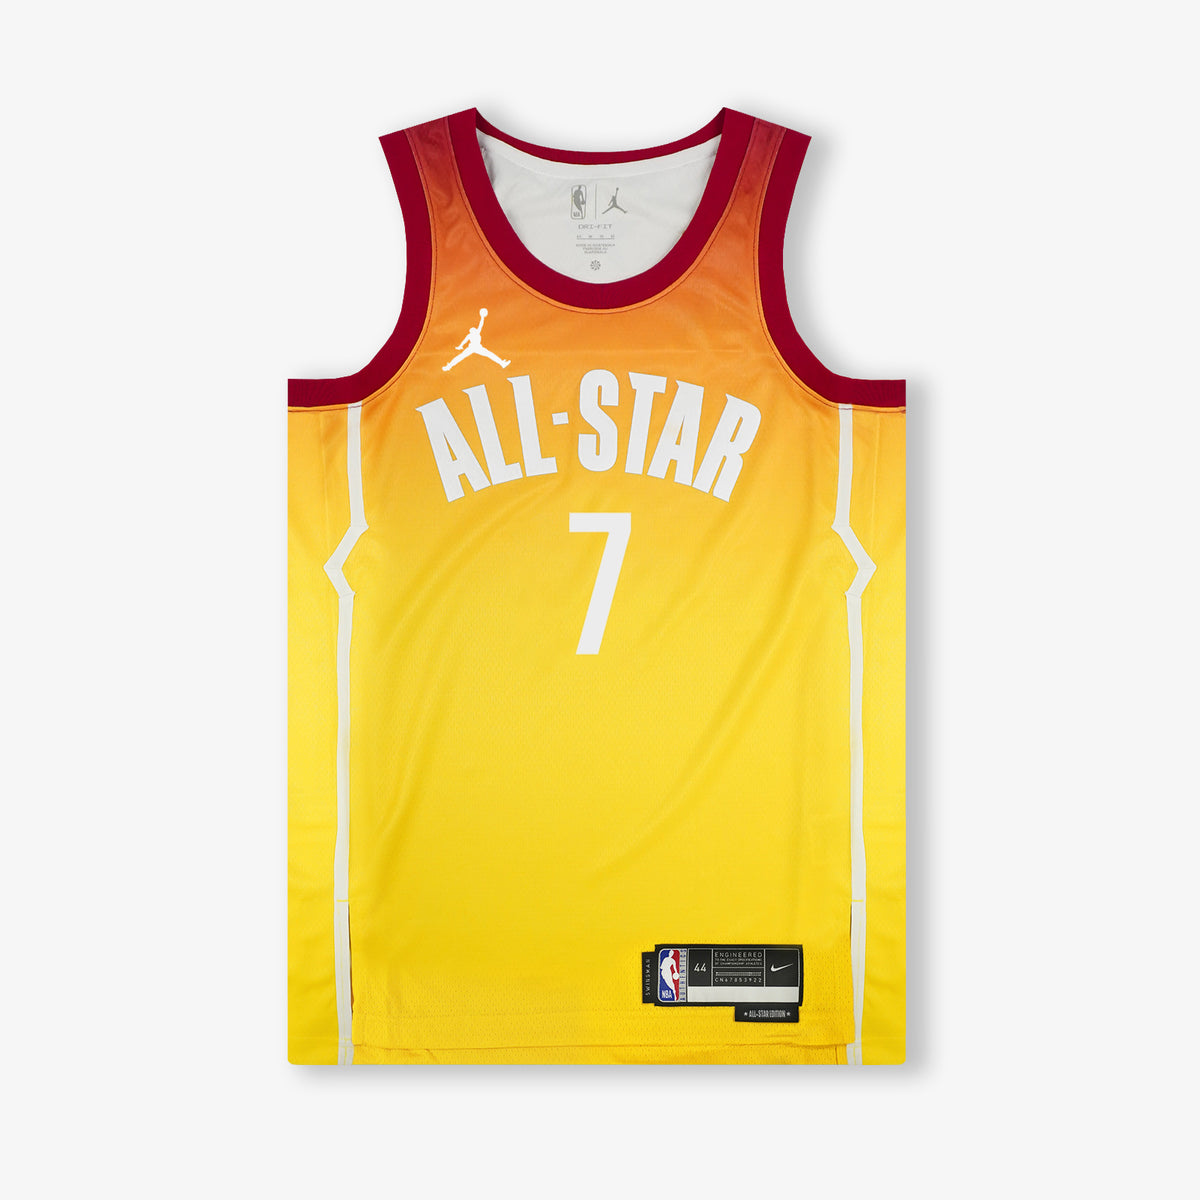 NBA All-Star 2020: The 8 different jerseys colors you'll see in